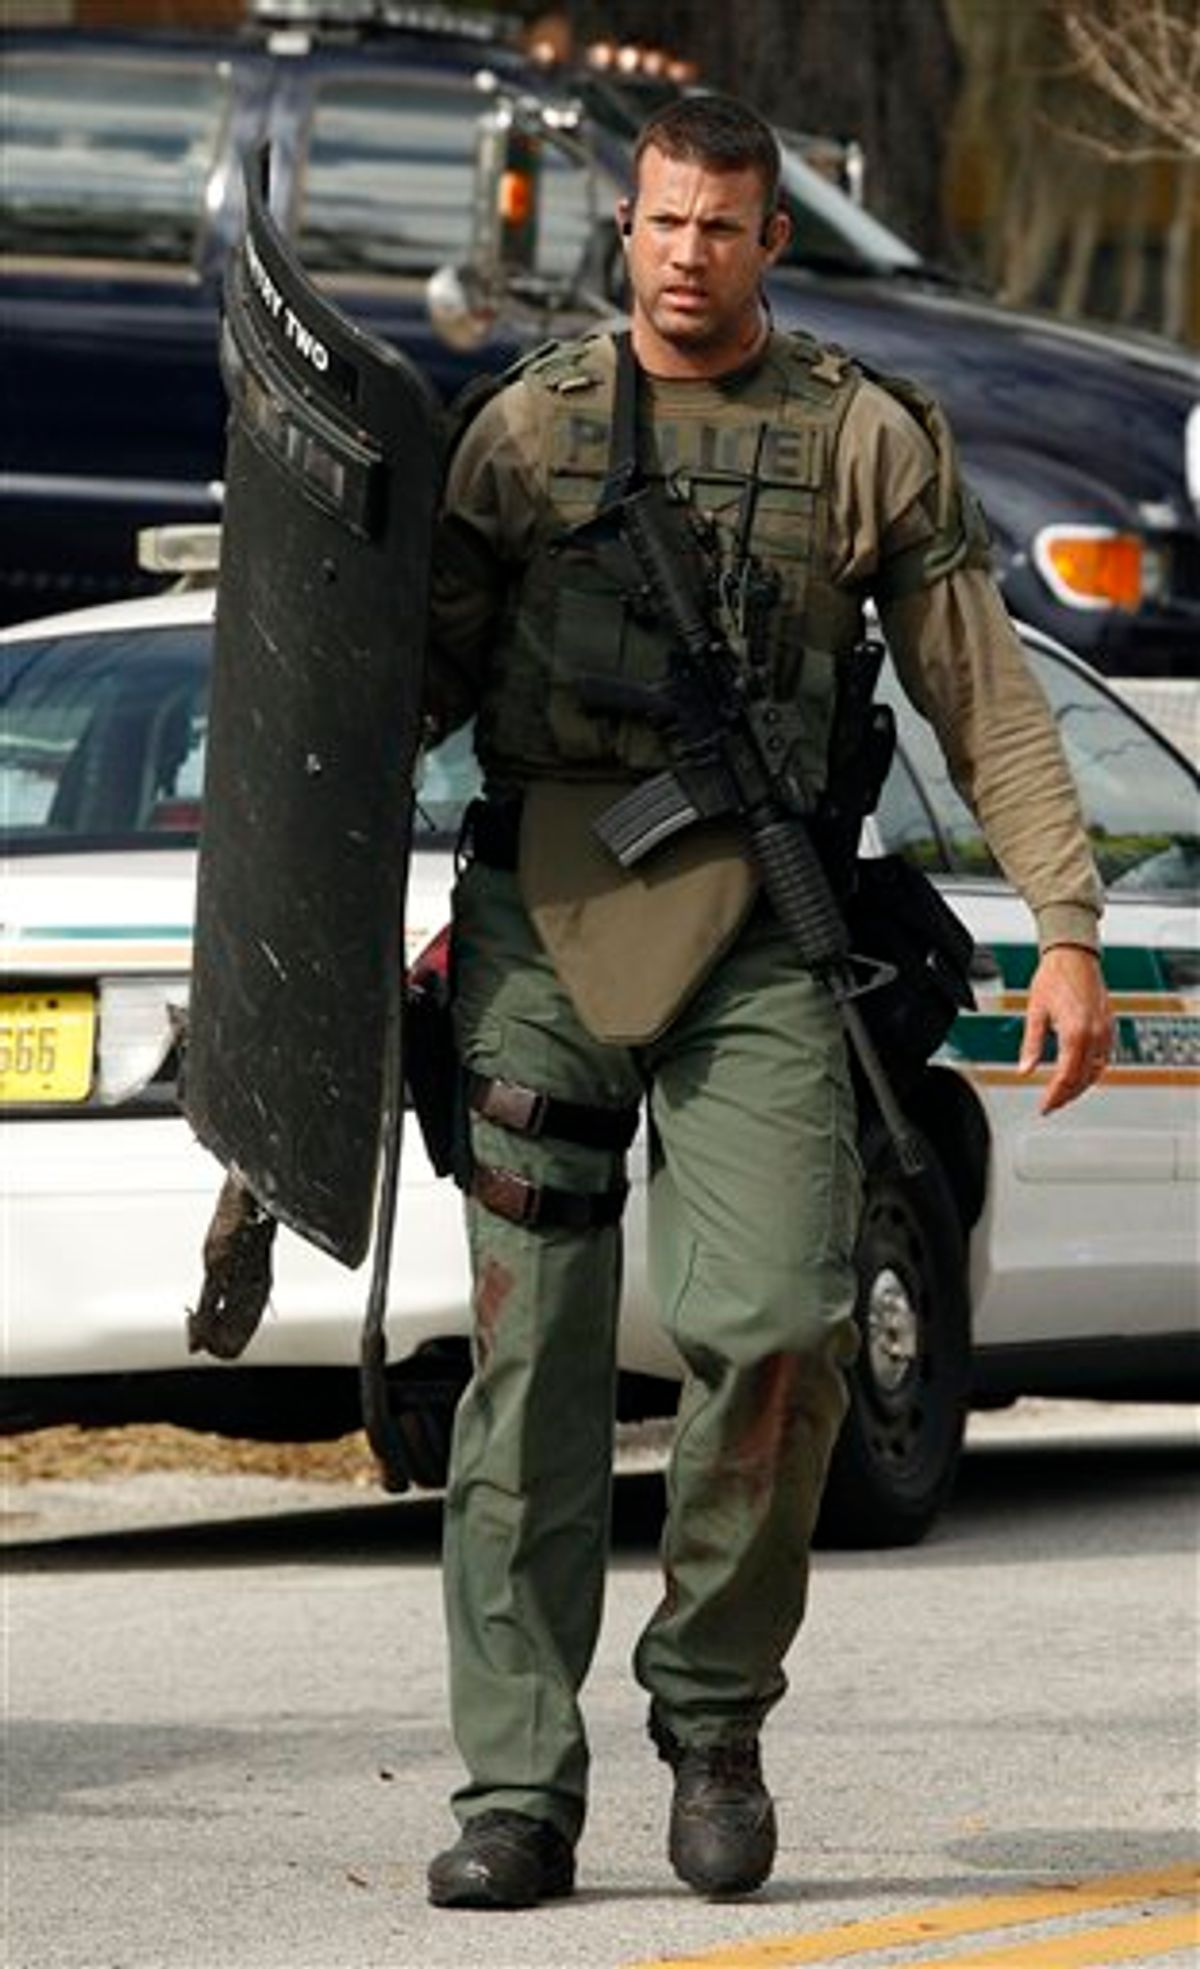 A heavily armed SWAT team member walks away from the scene where three officers were shot Monday, Jan. 24, 2011 in south St. Petersburg, Fla.  Police say a gunman suspected of killing two Florida police officers and wounding a U.S. marshal during a shootout has been found dead. St. Petersburg Police spokesman Michael Puetz says the suspect was found dead when officers went into the home Monday afternoon, about six hours after the shootout. Puetz said officers originally went to the home to arrest 39-year-old Hydra Lacy Jr.  (AP Photo/Chris O'Meara) (AP)